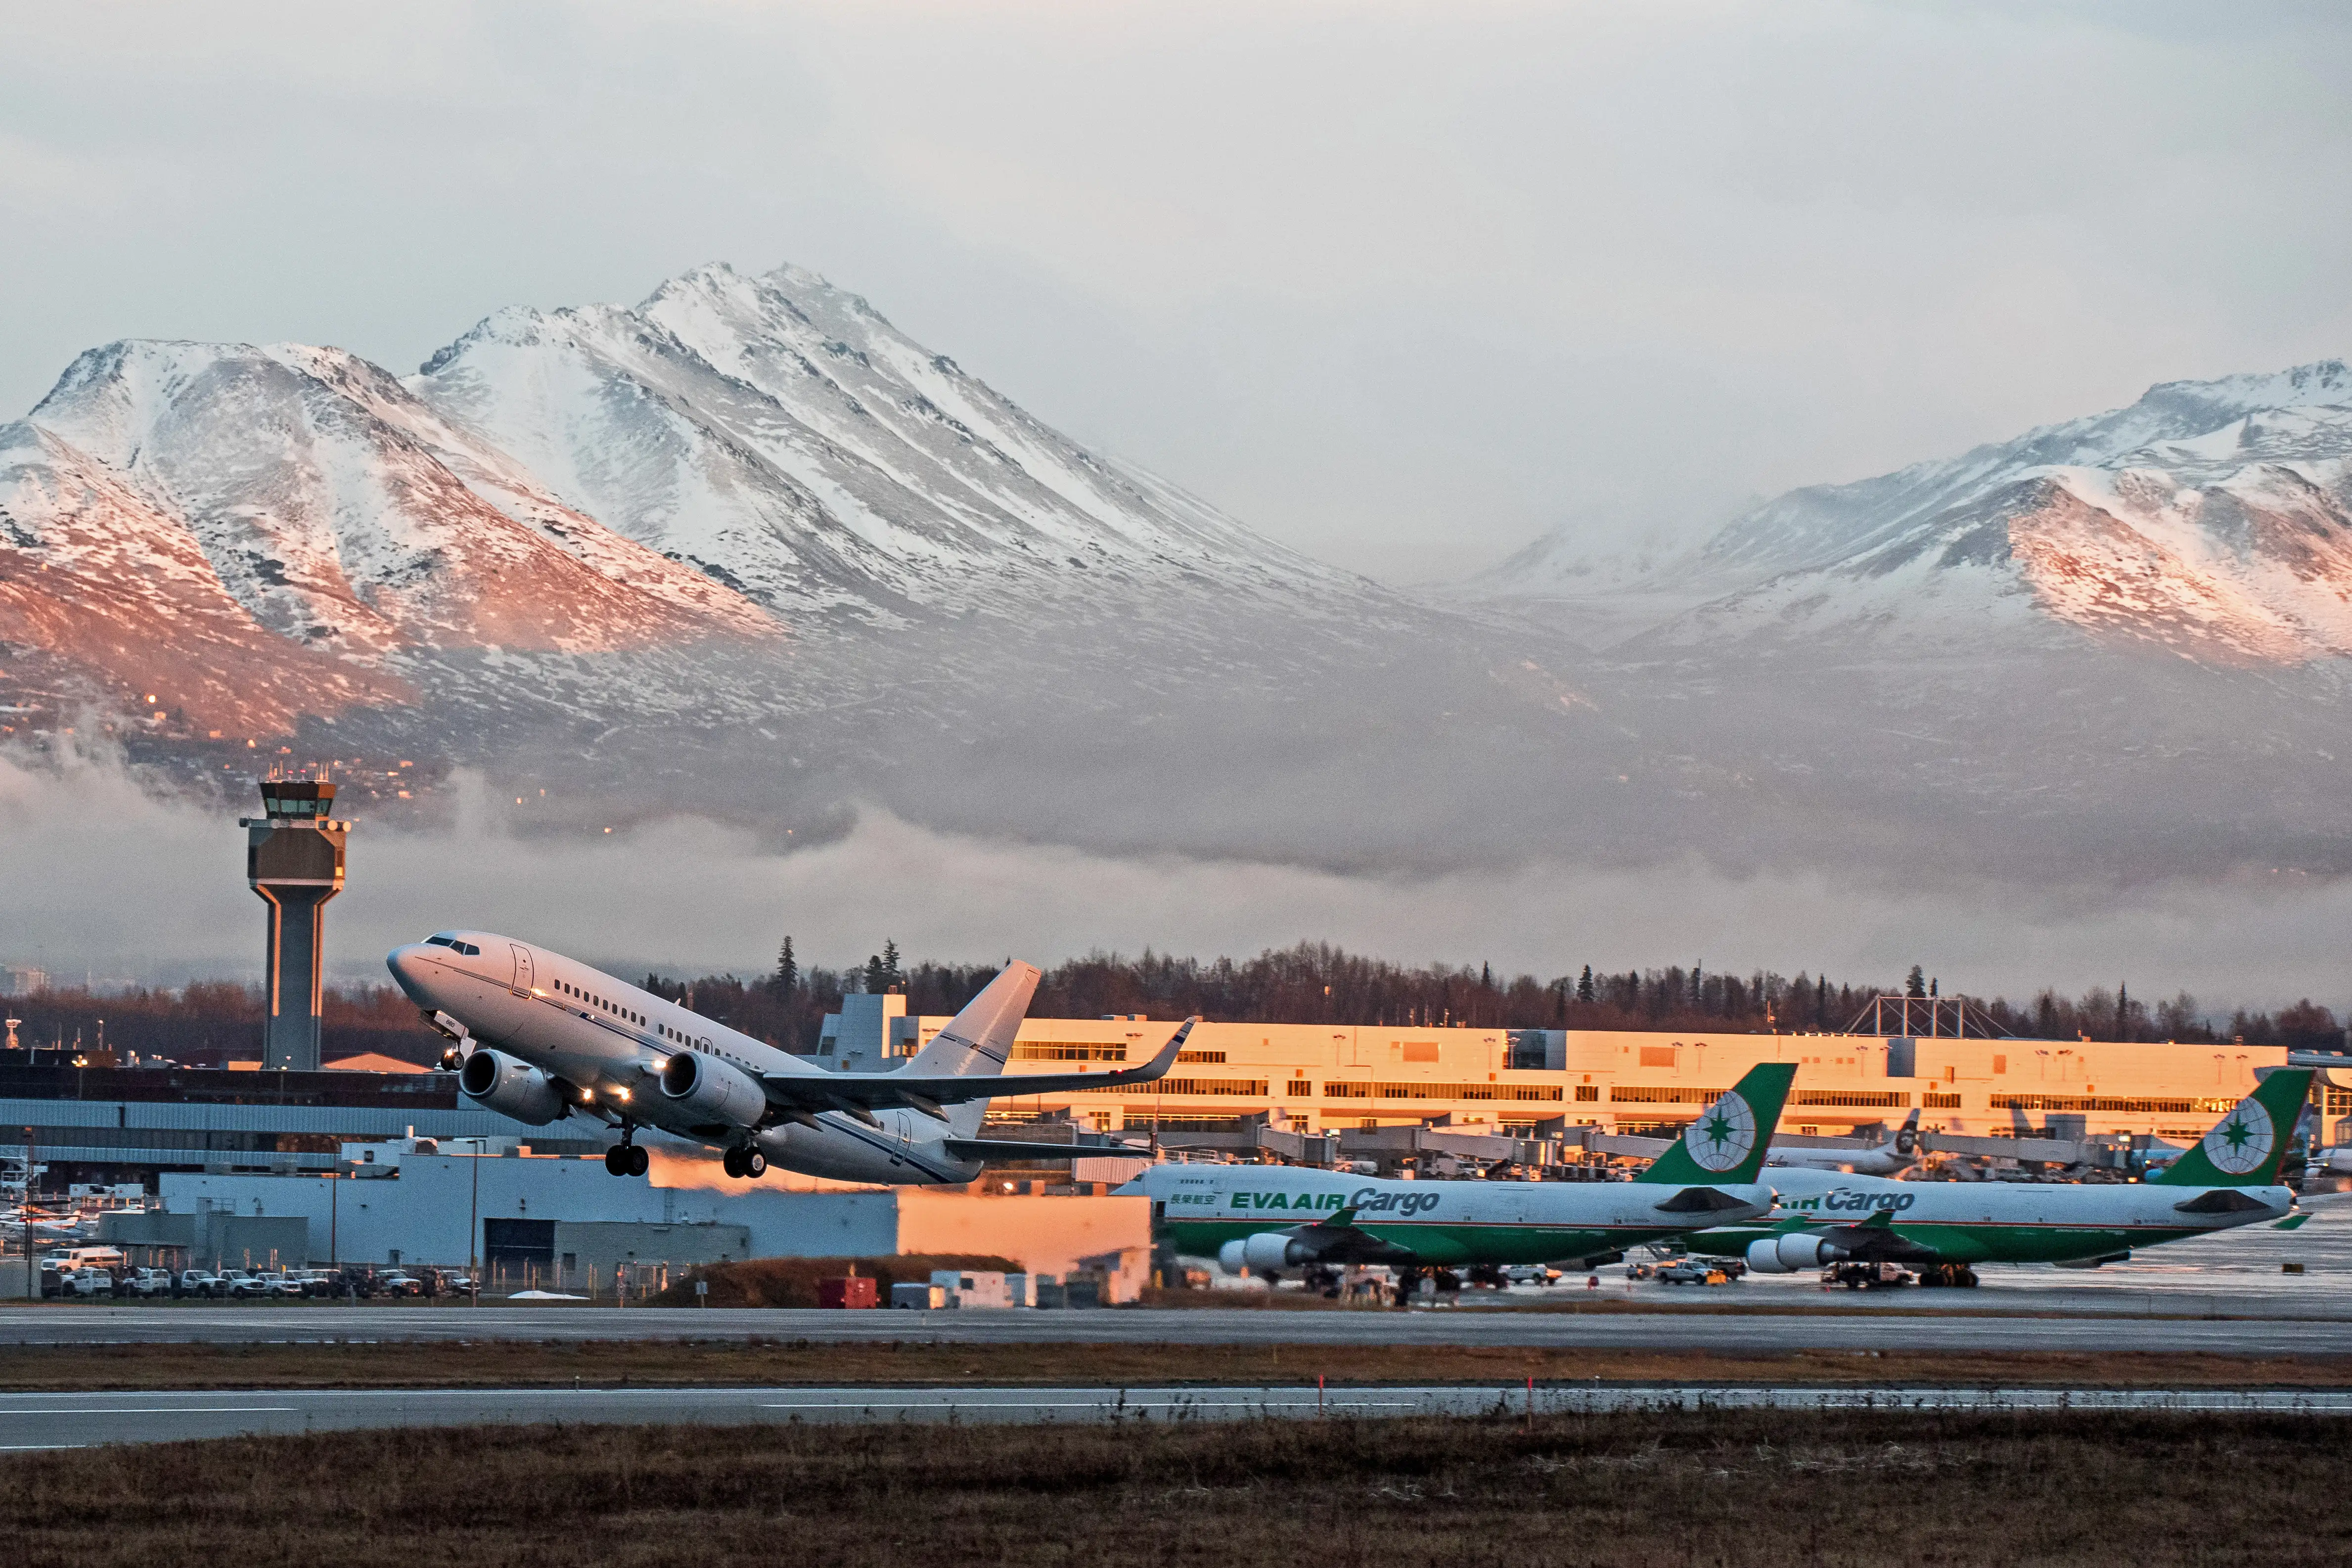 Aircrafts depart from Ted Stevens Anchorage International Airport at sunset, Anchorage, Alaska